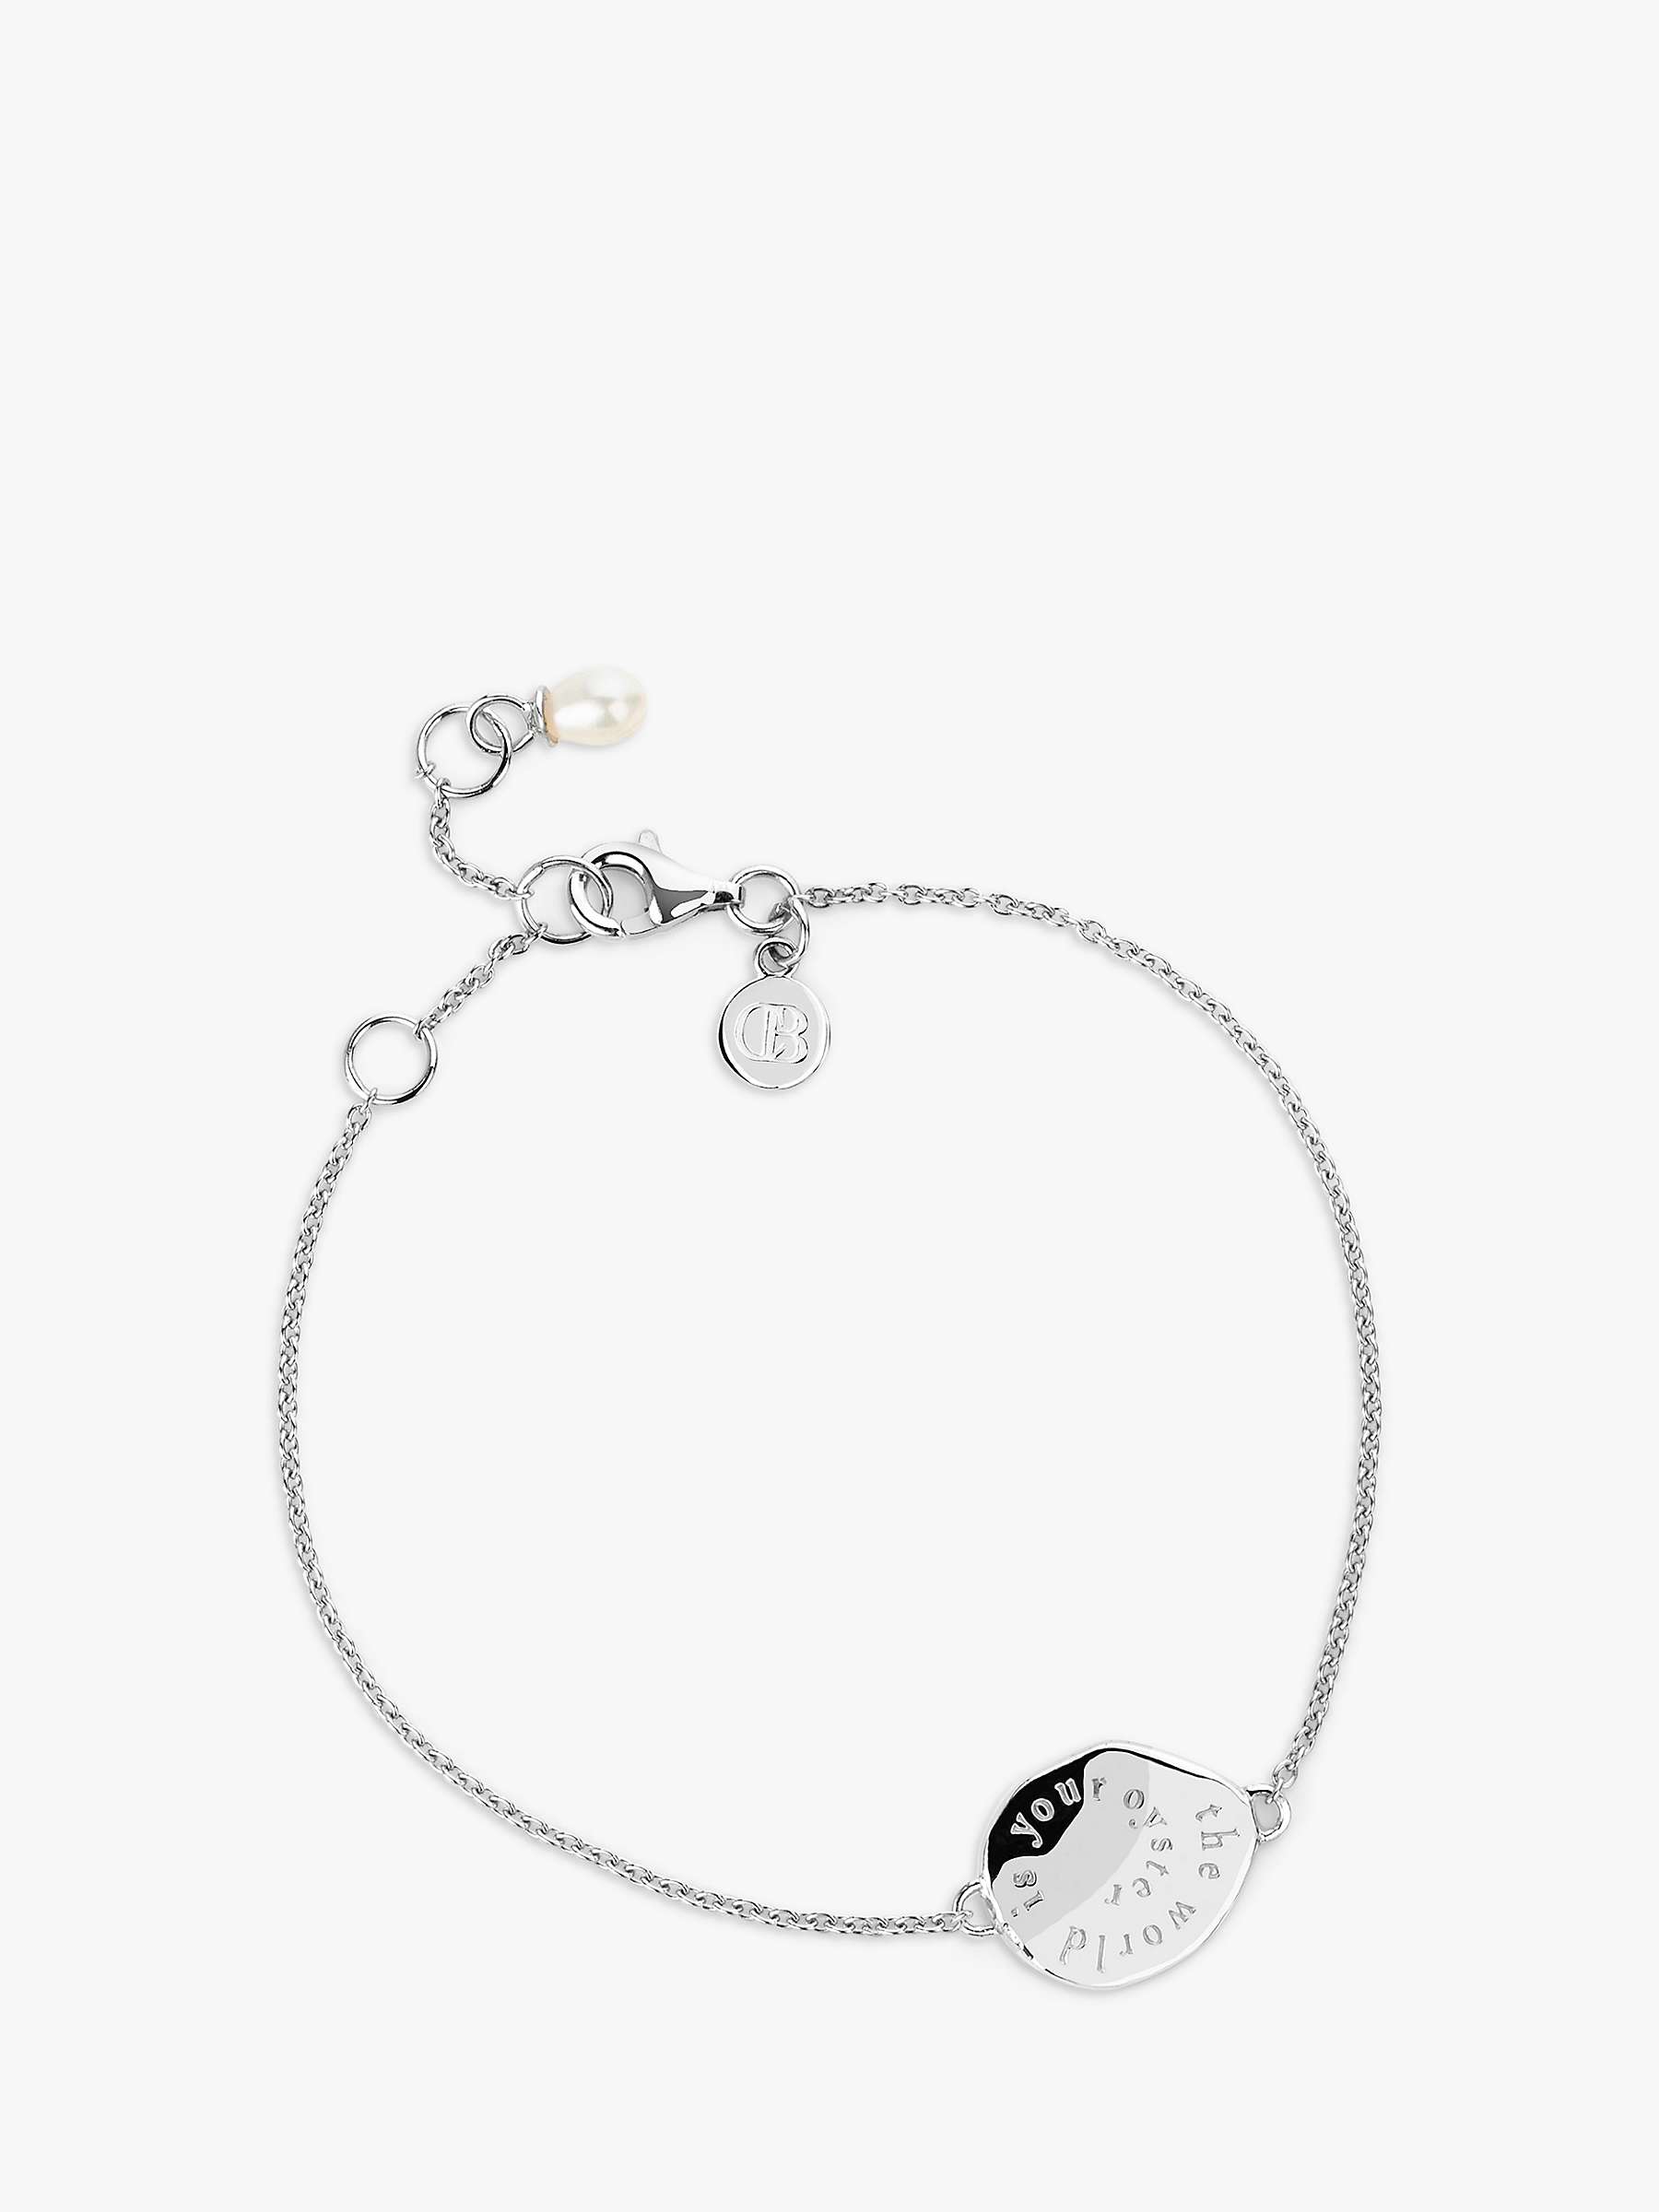 Buy Claudia Bradby The World is Your Oyster Freshwater Pearl Chain Bracelet, Silver Online at johnlewis.com